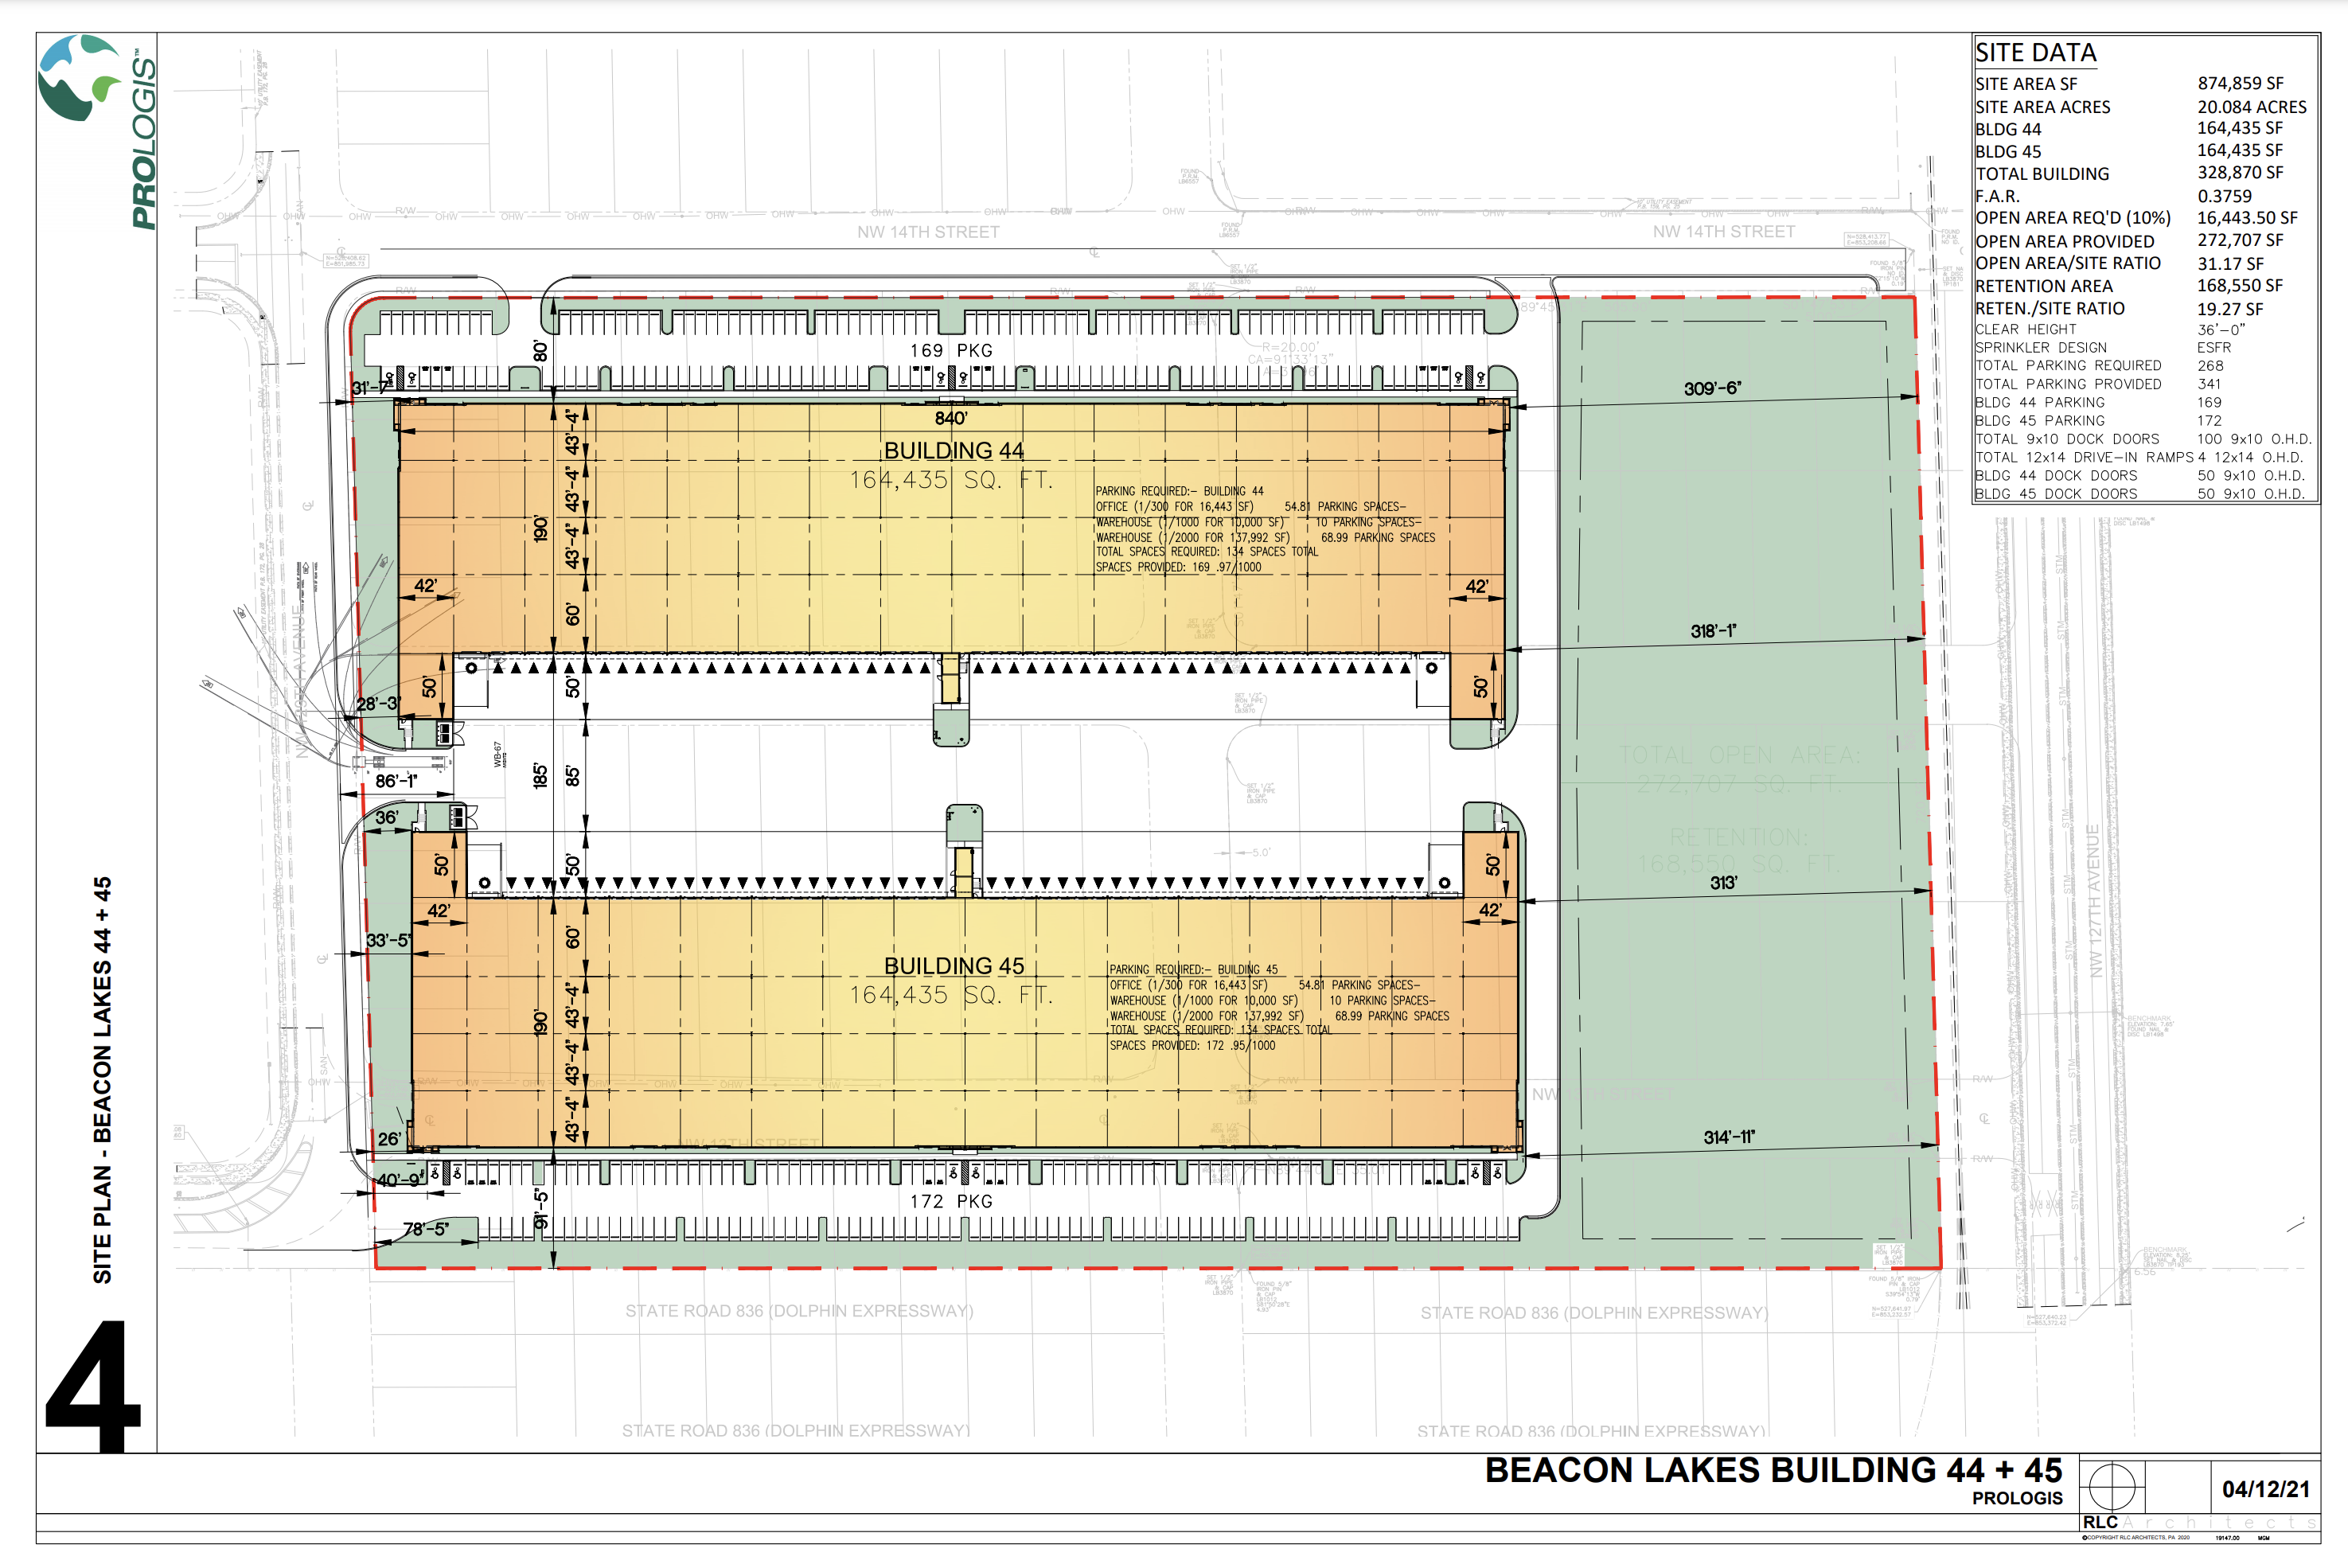 Site Plan for Beacon Lakes Building 44 + 45. Courtesy of Prologis 2, LP.